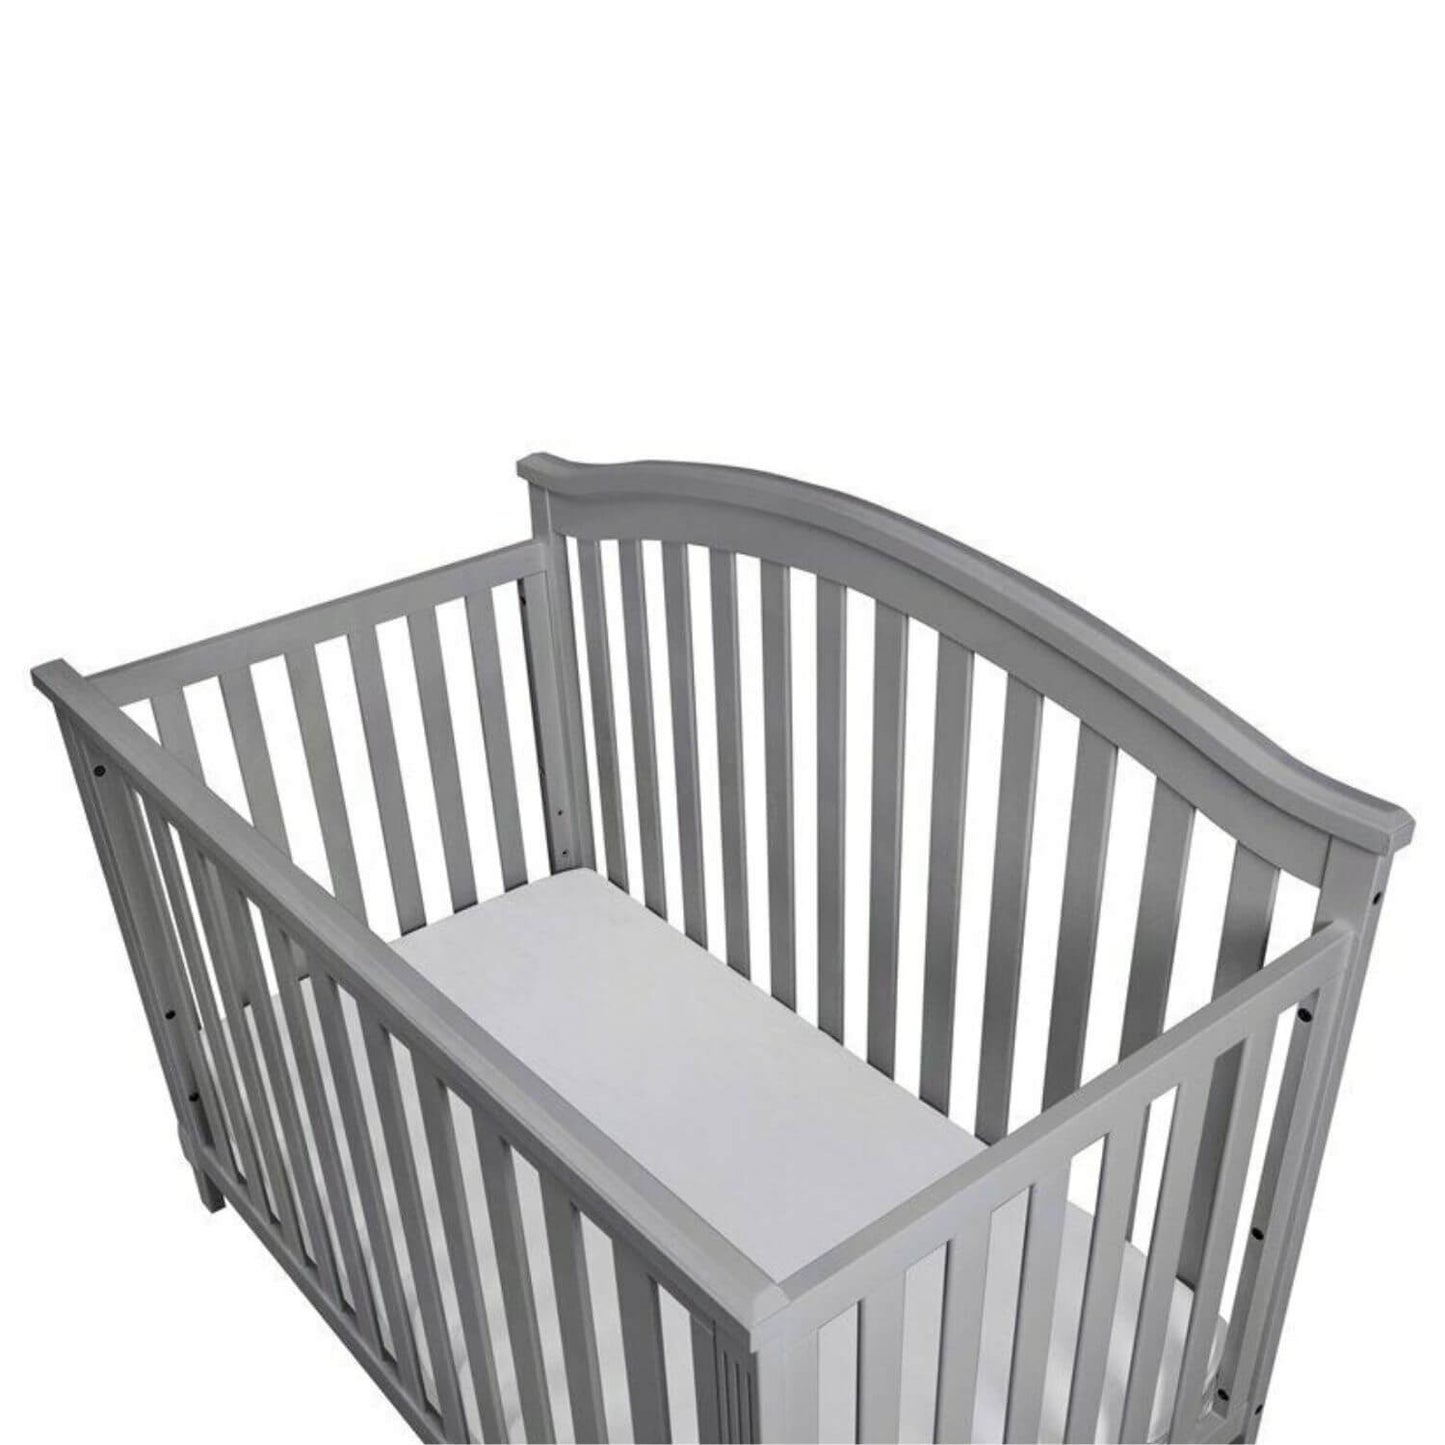 AFG Alice 4-in-1 Baby Crib with Guardrail Gray